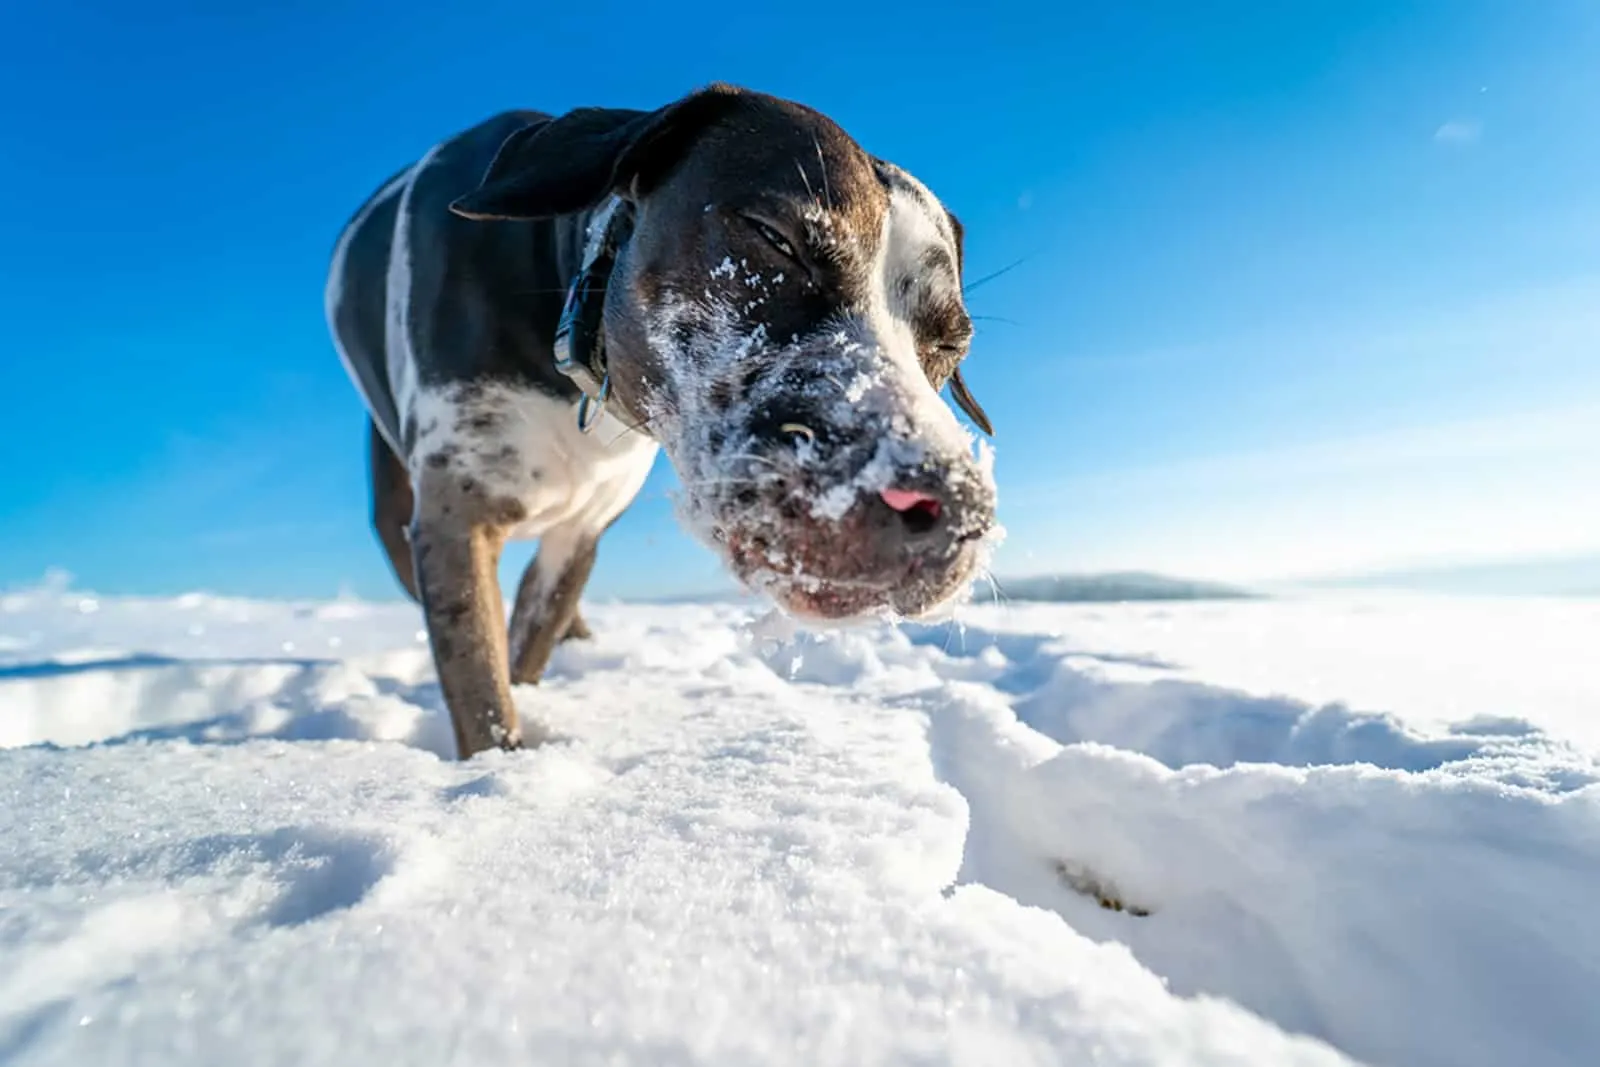 catahoula leopard dog in the snow